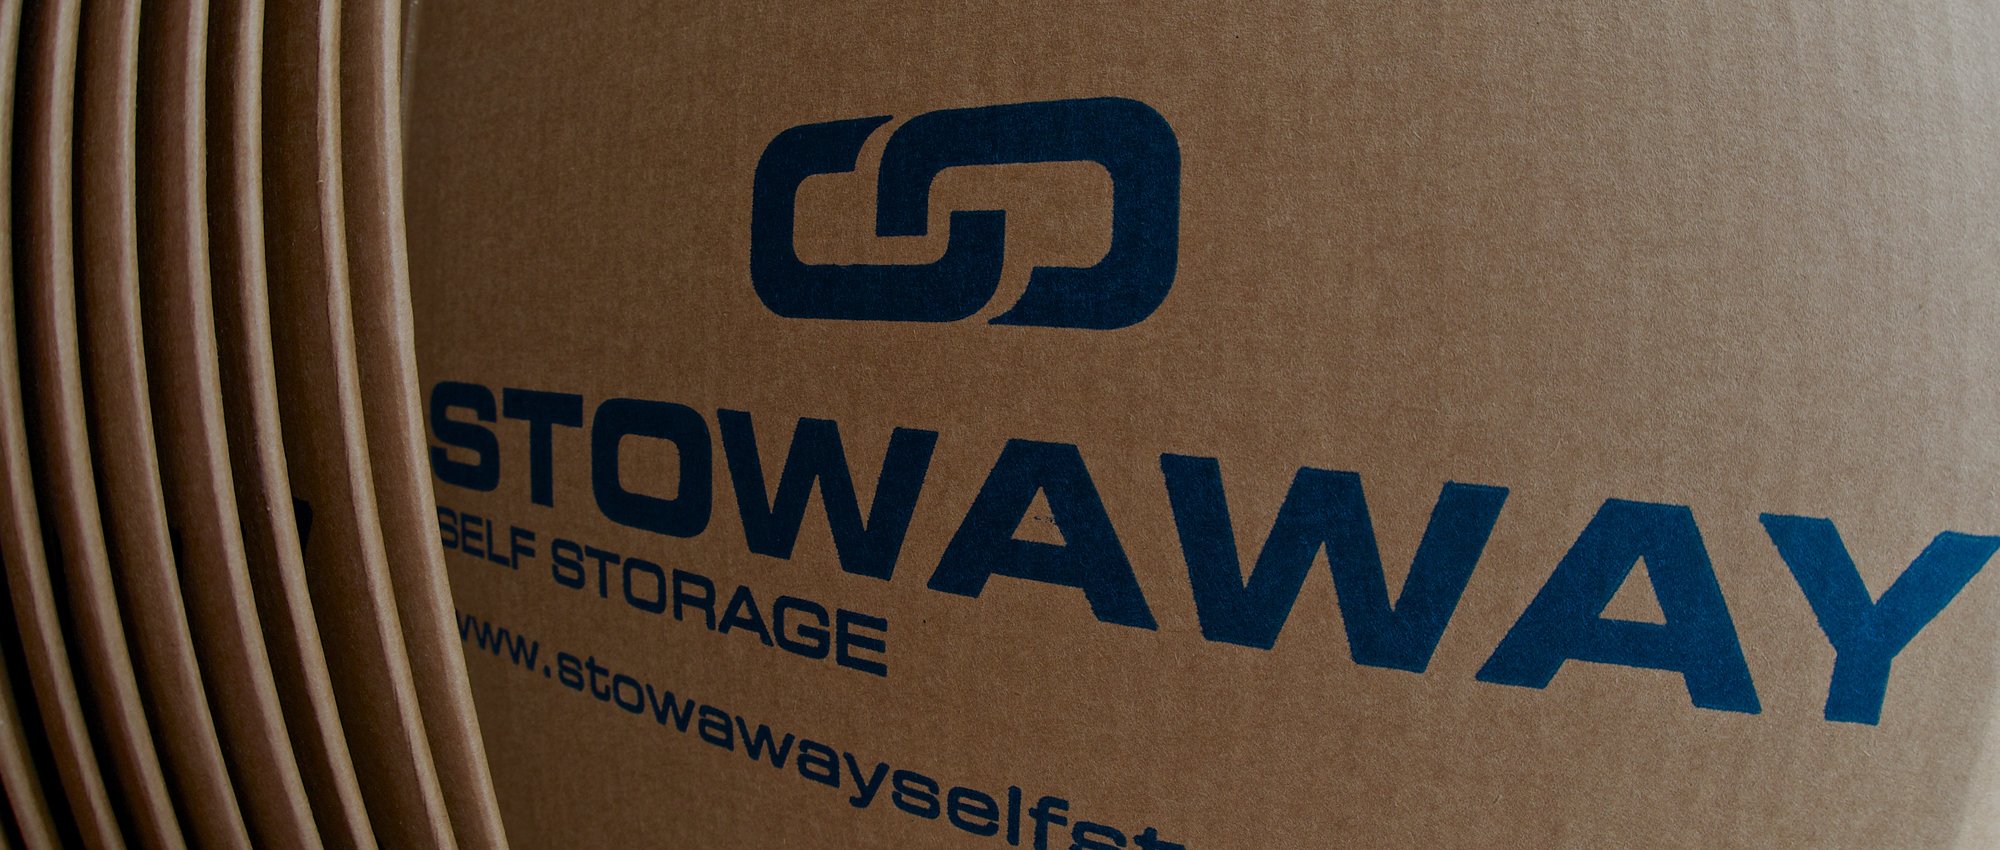 Stowaway Self Storage Units in NJ, PA and NY